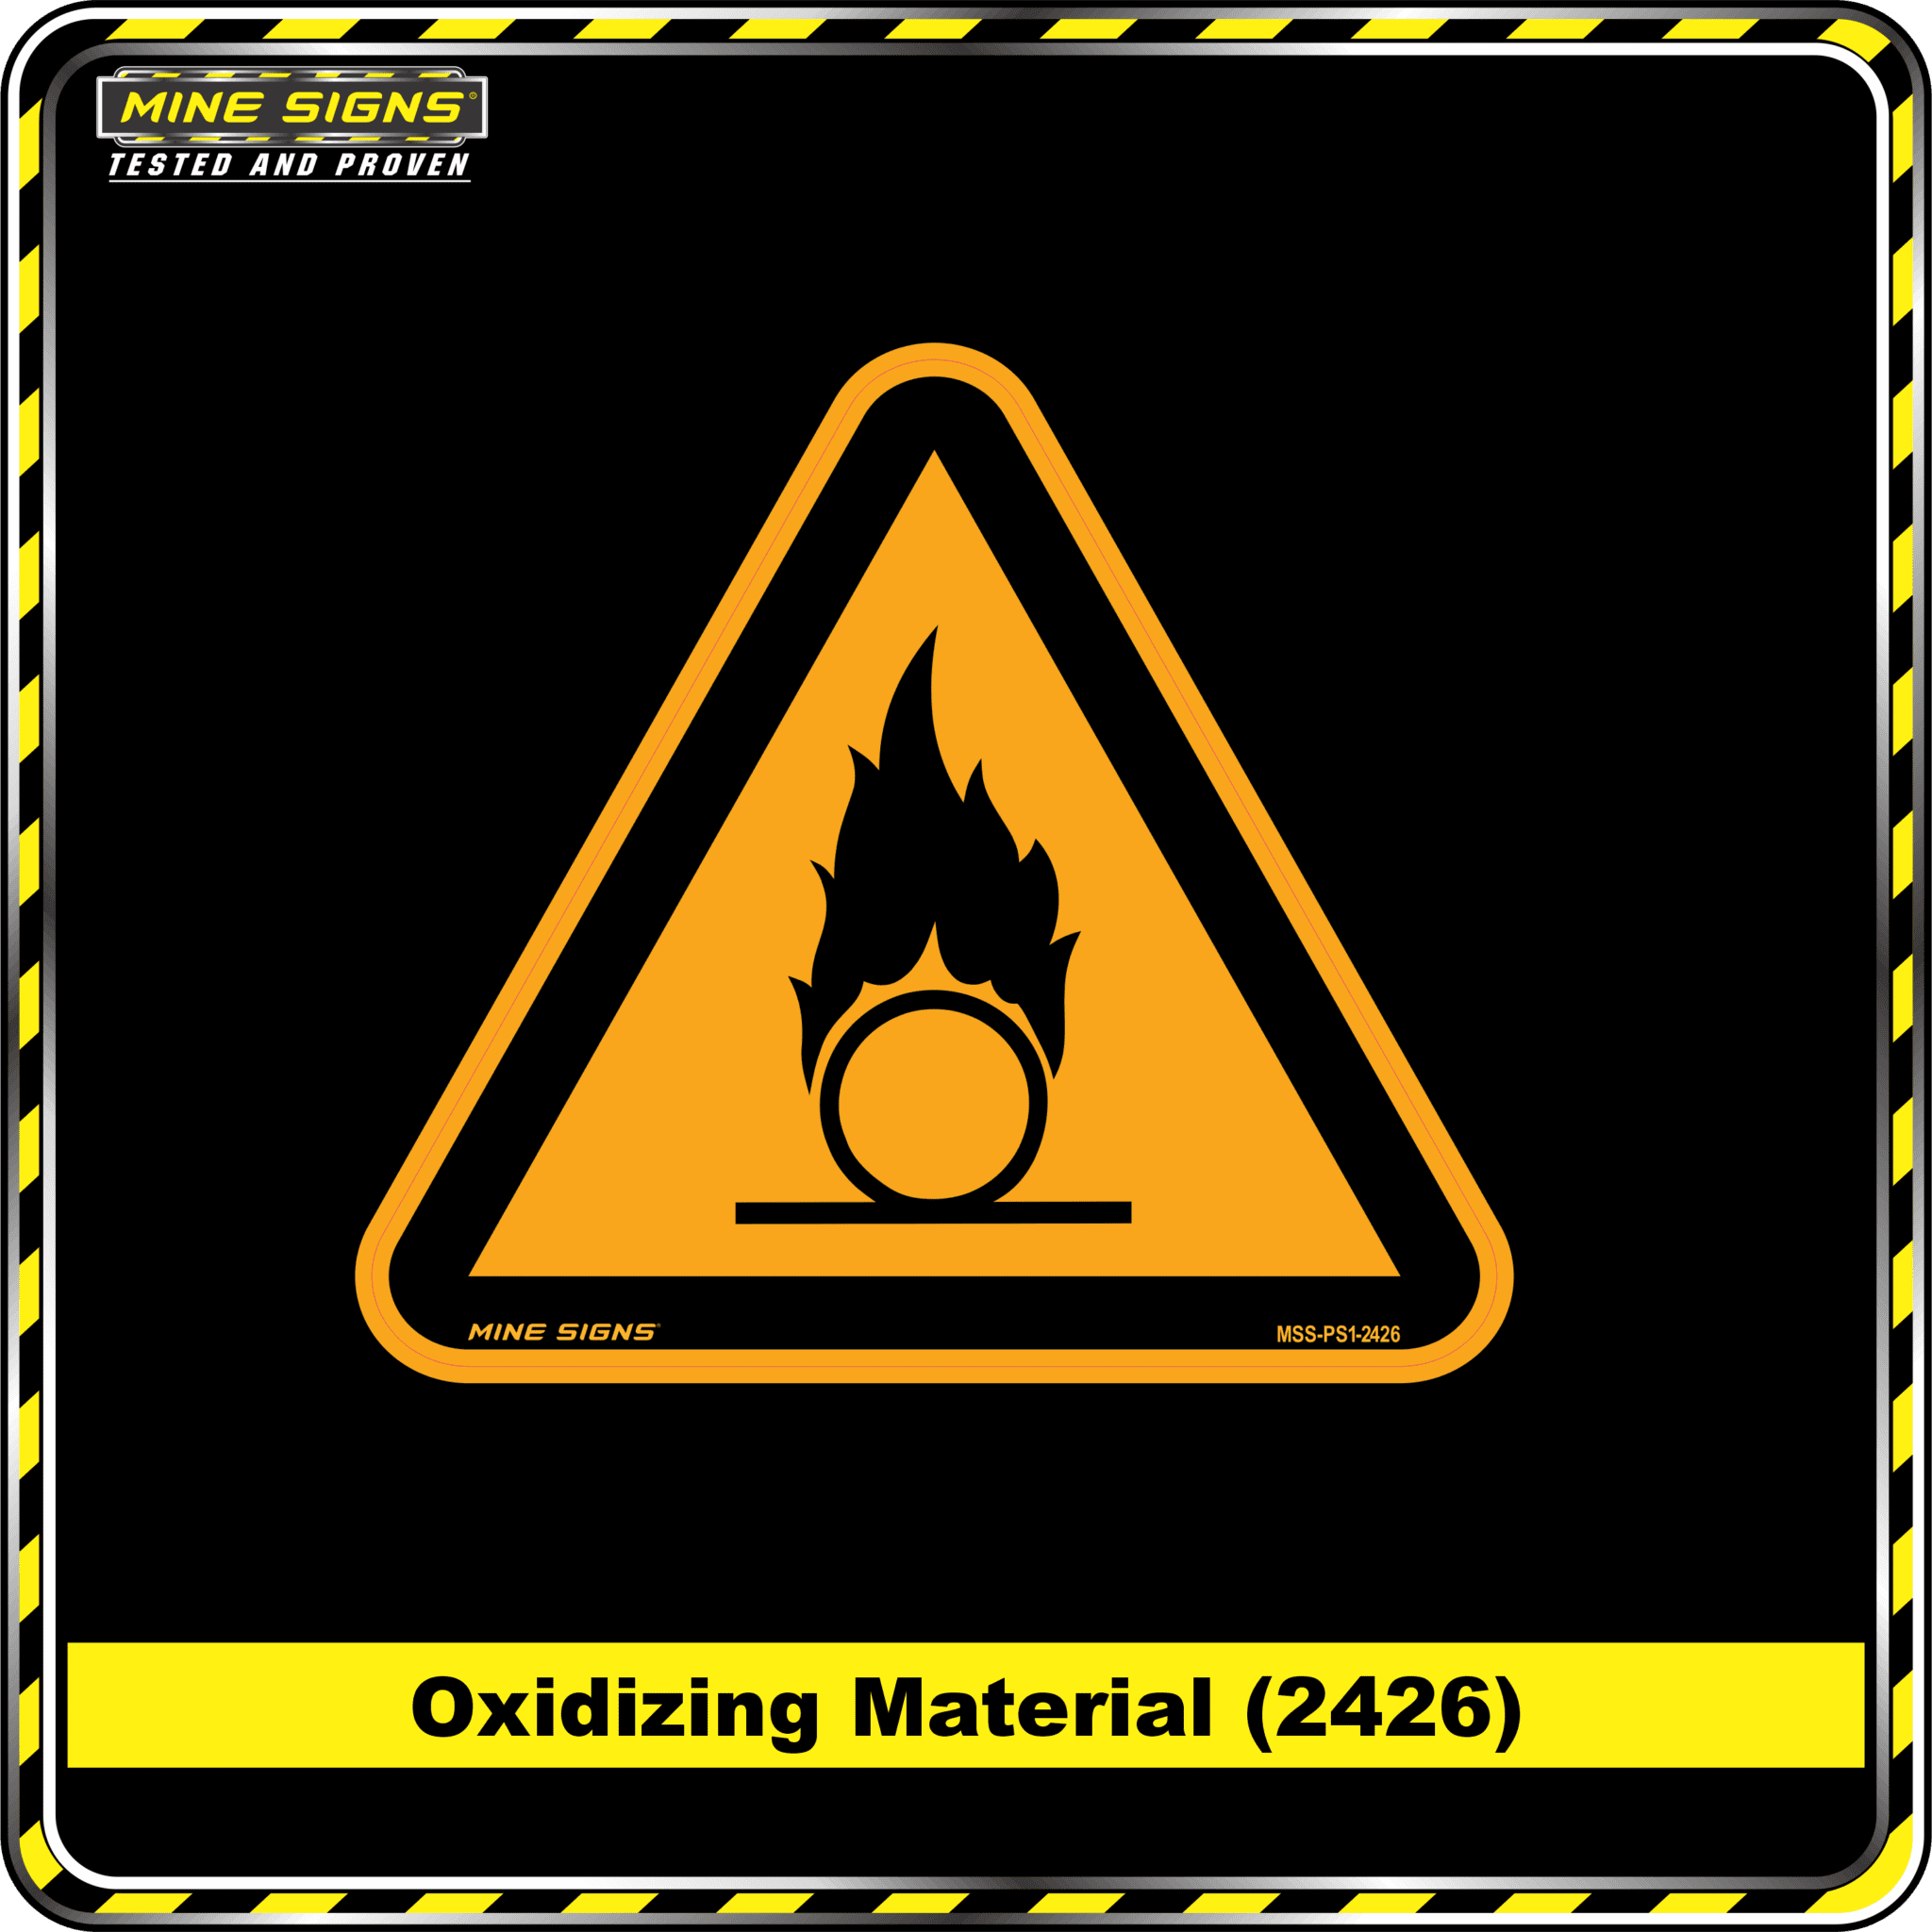 MS - Product Background - Oxidizing Material 2426